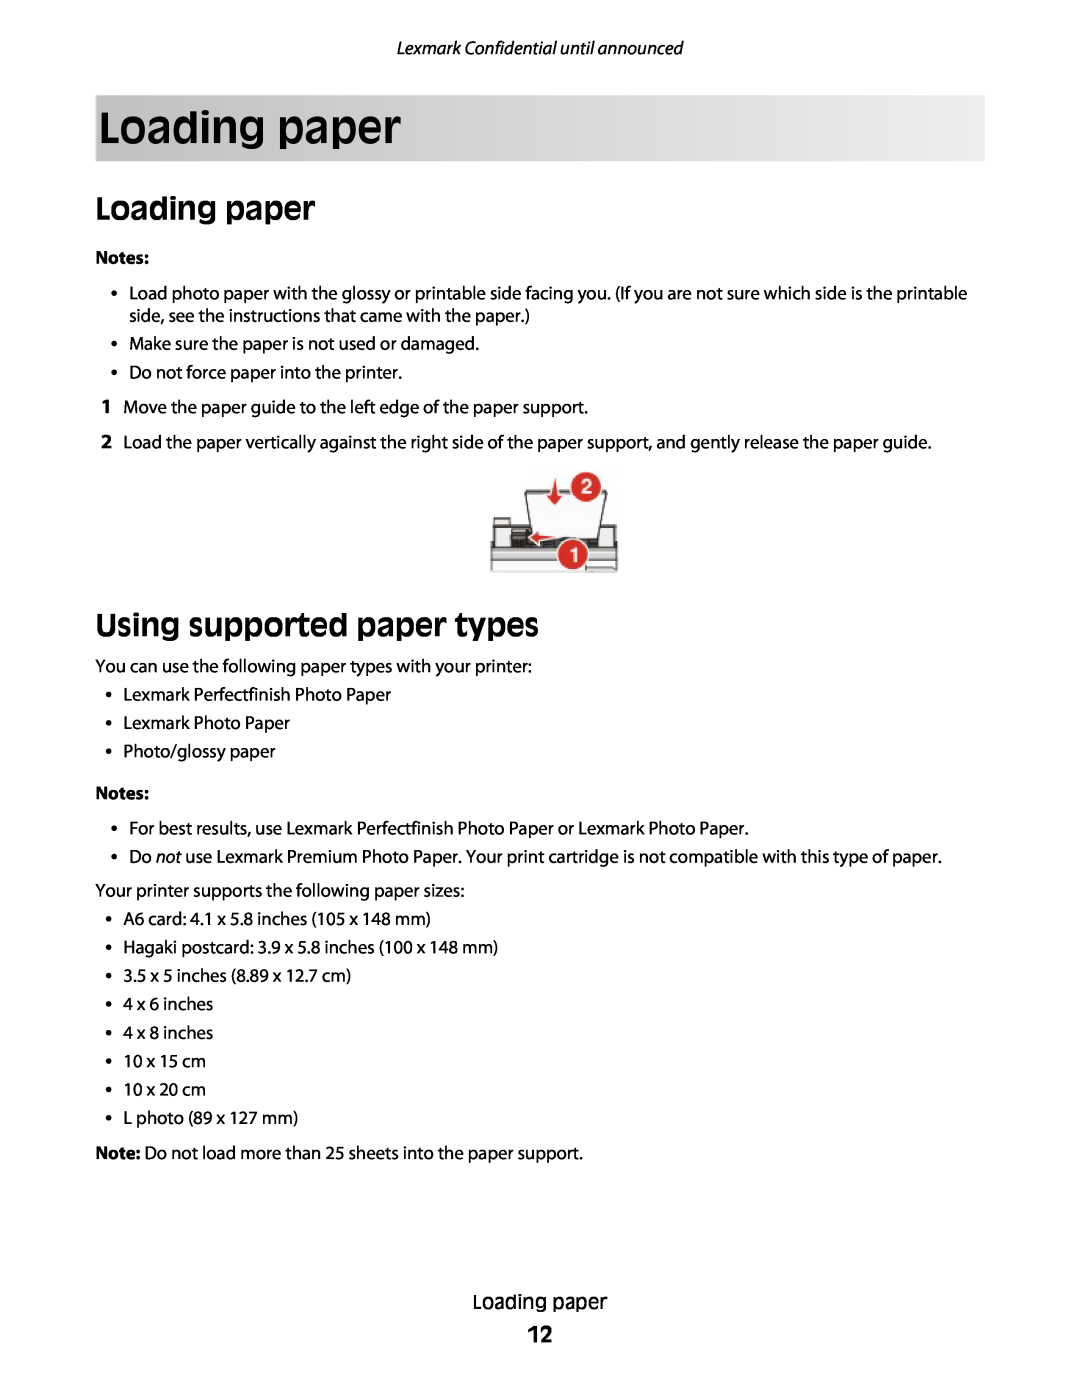 Lexmark P200 manual Loading paper, Using supported paper types, Lexmark Confidential until announced 